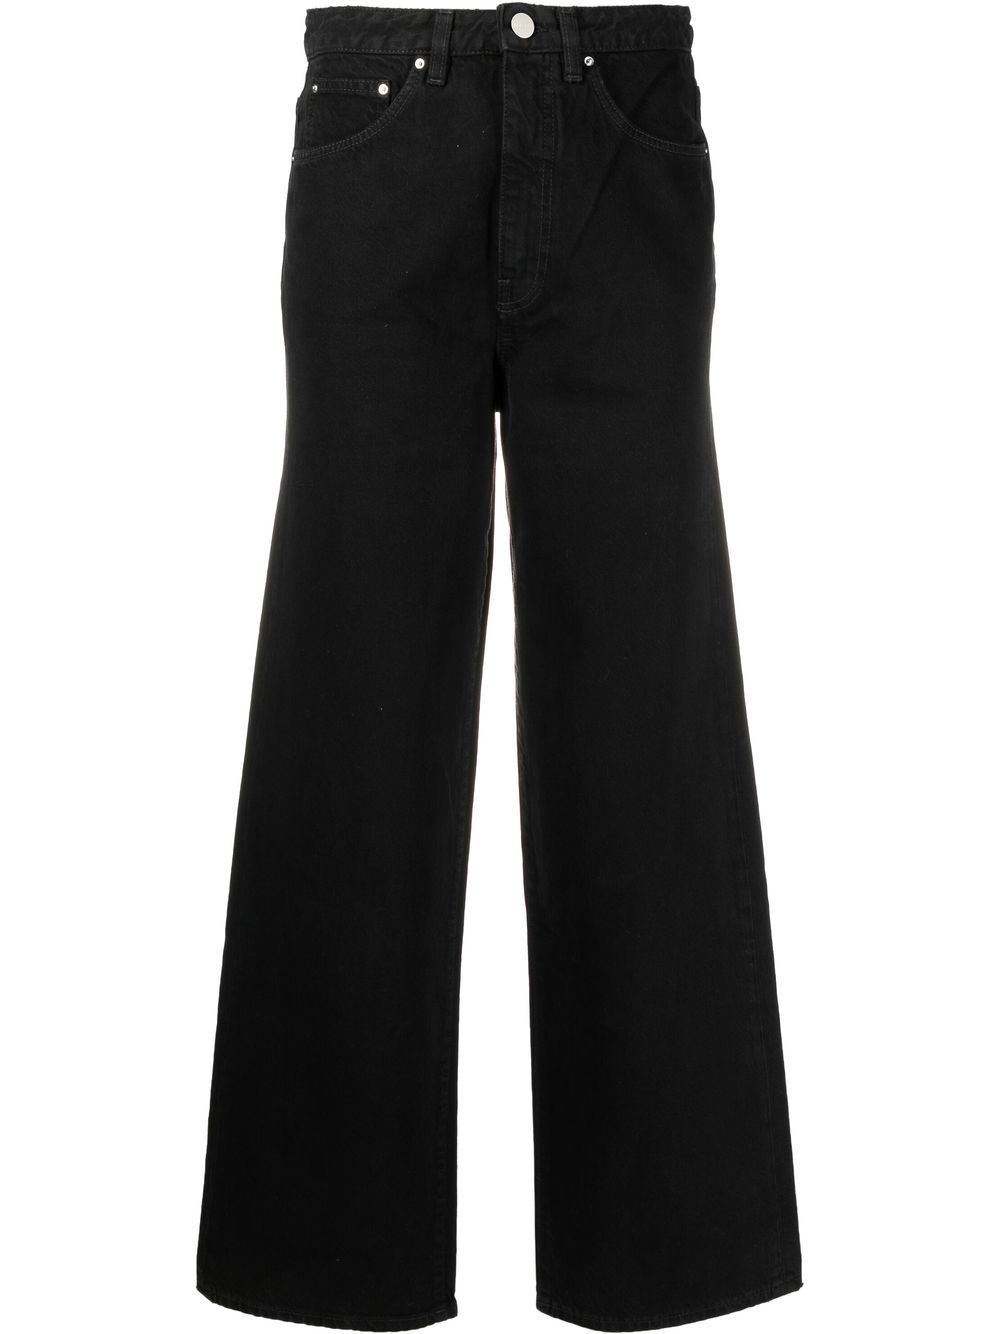 Black high-waisted flared jeans - women TOTEME | 221230739204